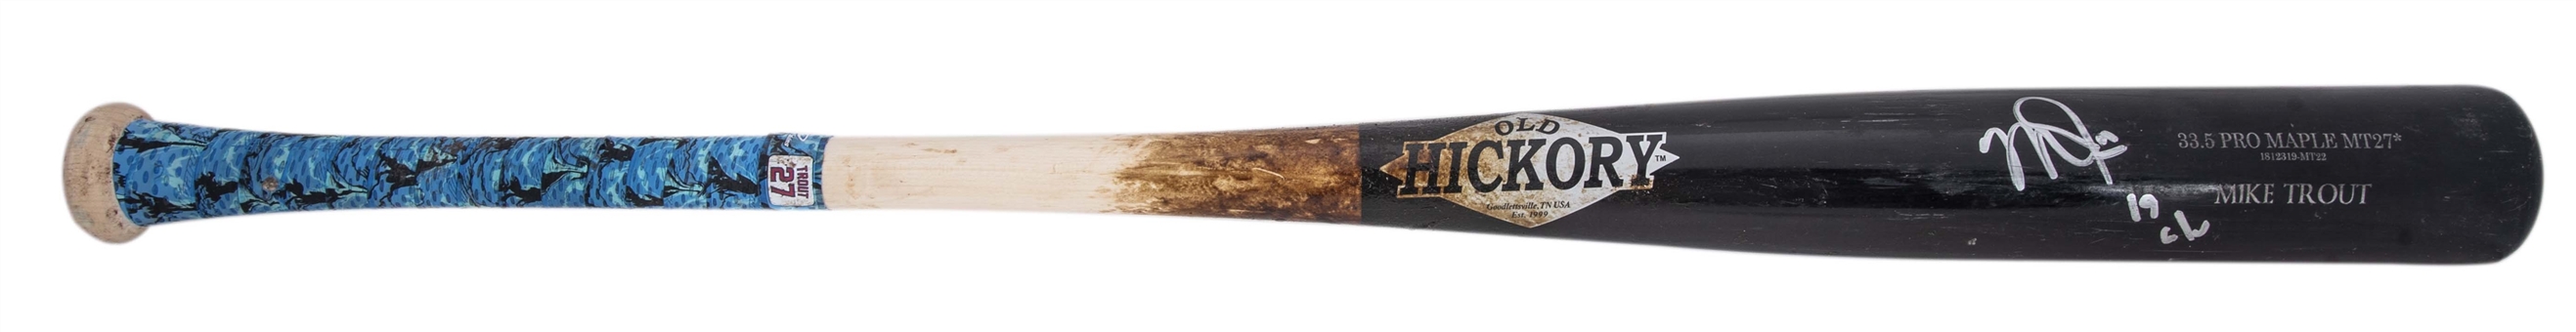 2019 Mike Trout Game Used, Photo Matched & Signed Old Hickory MT27* Model Bat (Anderson Authentics & PSA/DNA GU 10)